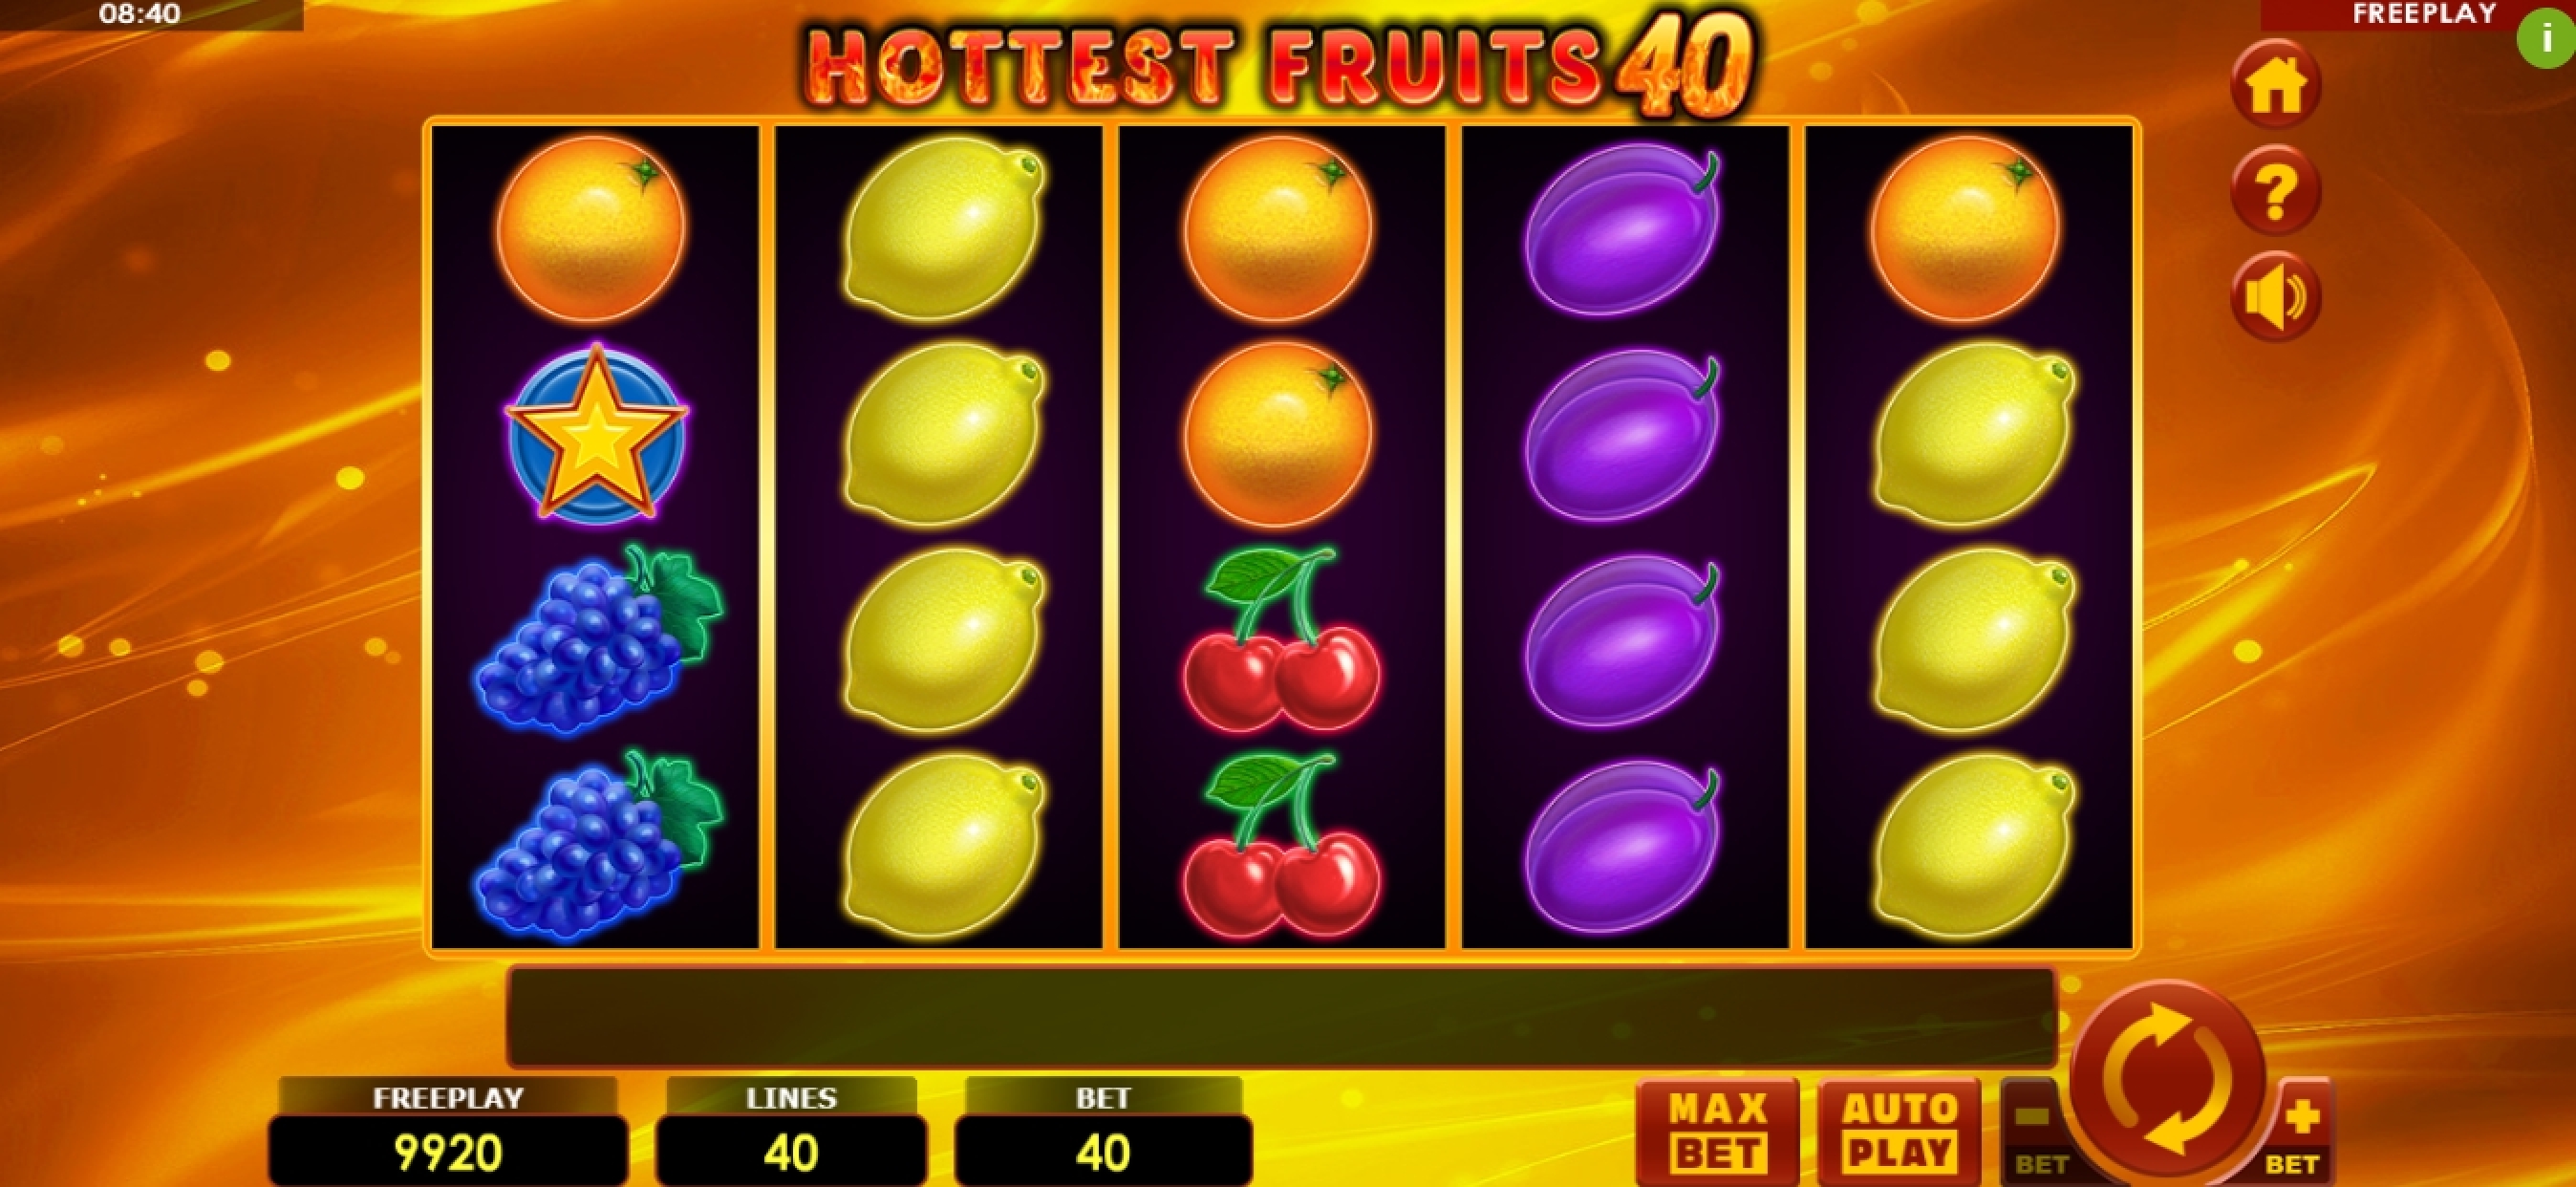 Reels in Hottest Fruits 40 Slot Game by Amatic Industries